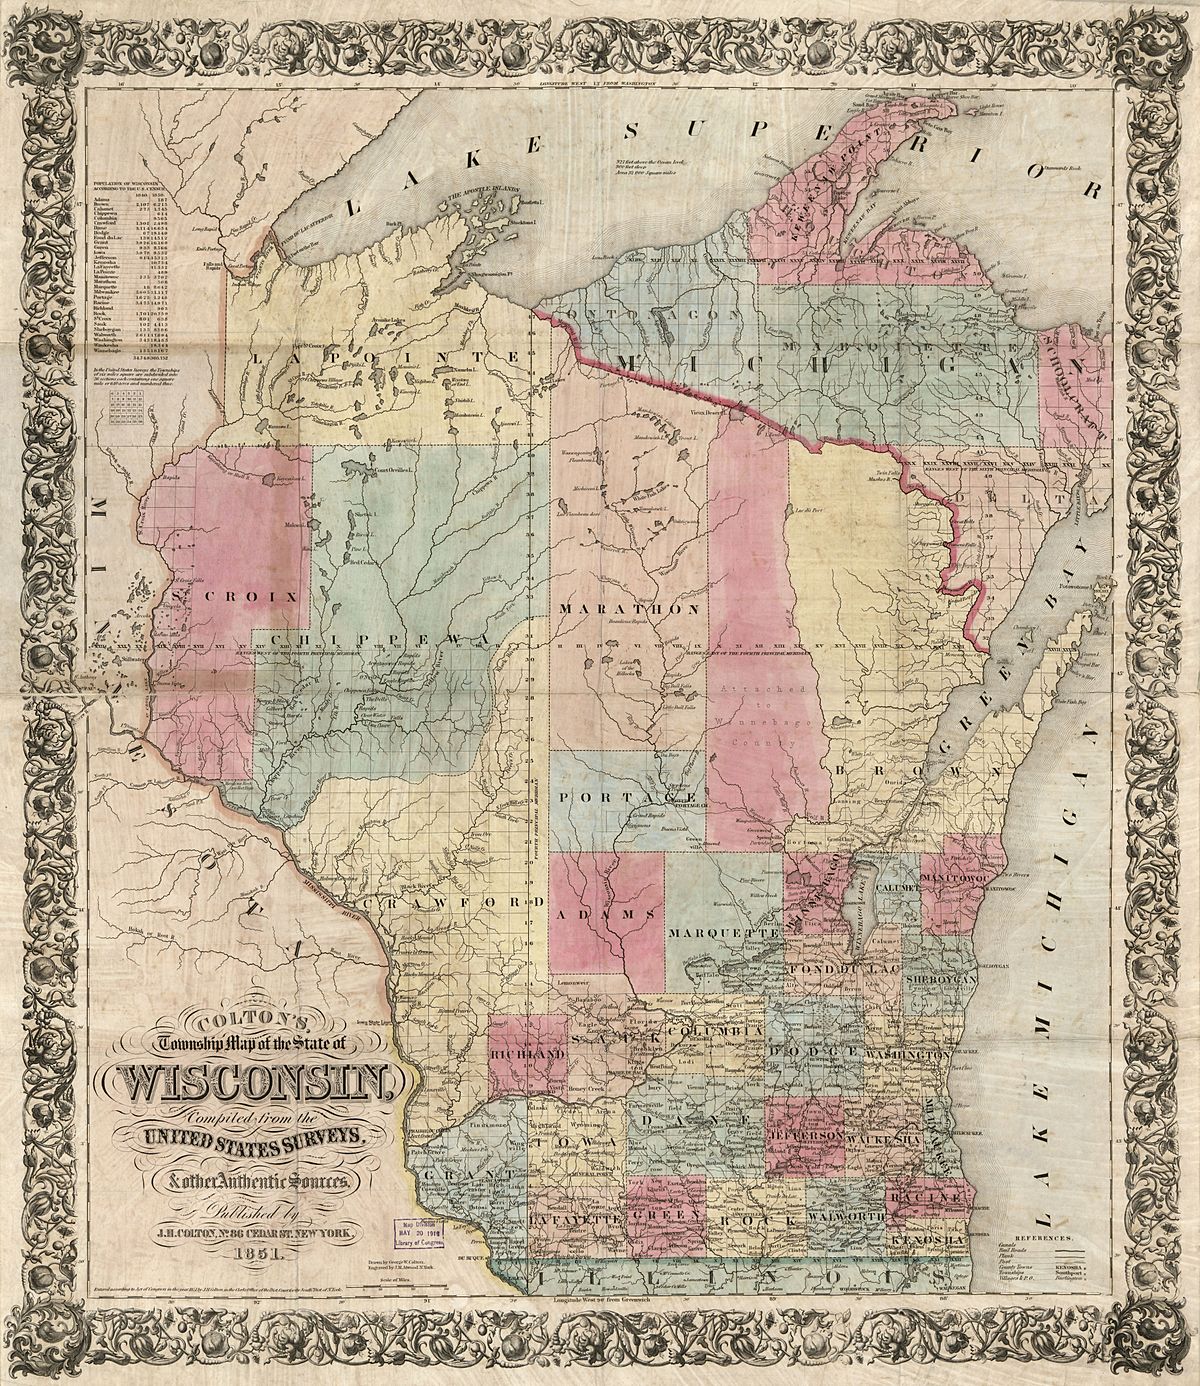 1851 boundaries of Brown County, prior to the separation of Door County in 1851